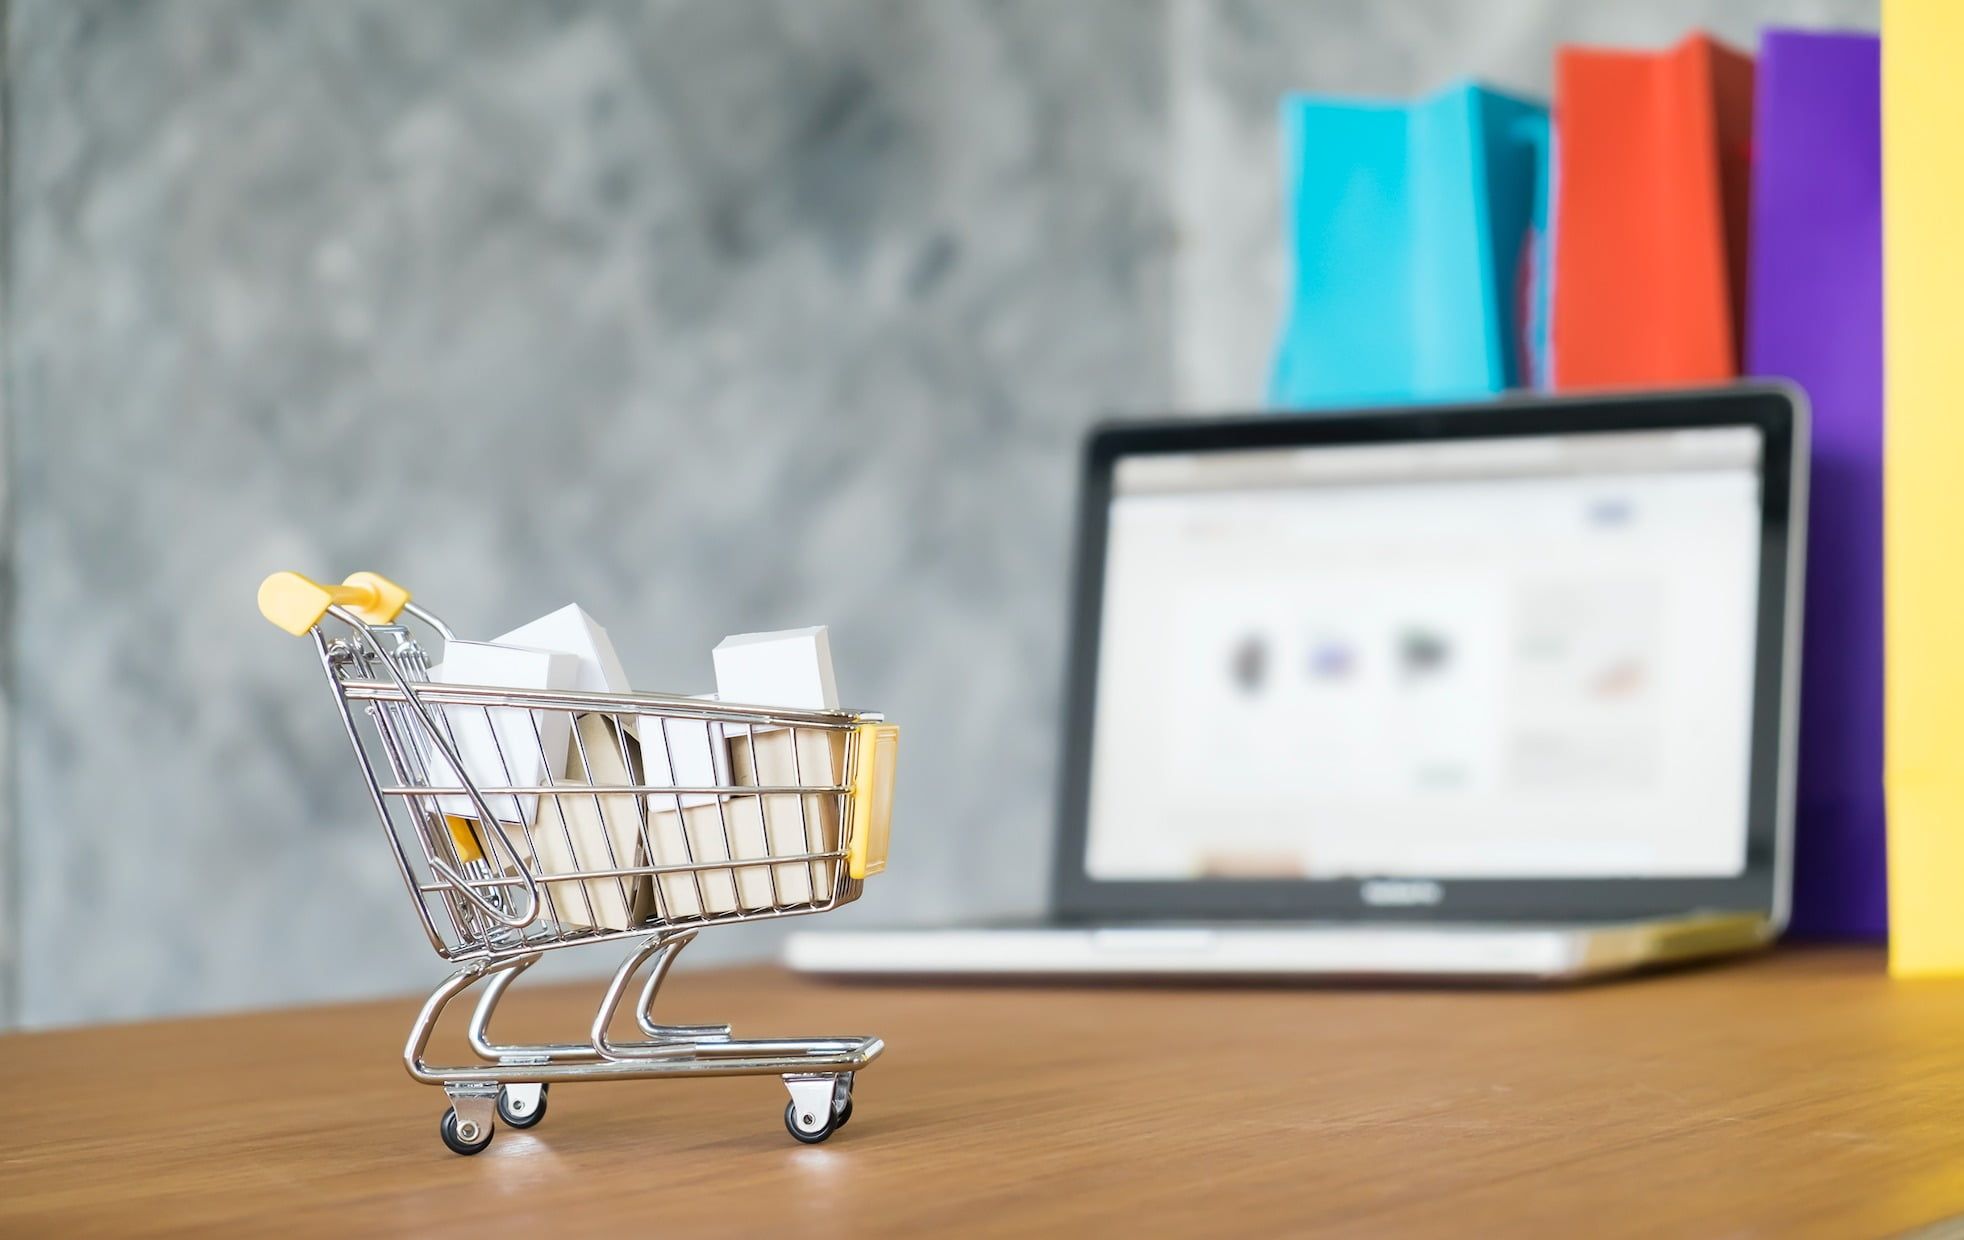 Ecommerce SEO: How To Do Keyword Research For An Ecommerce Website